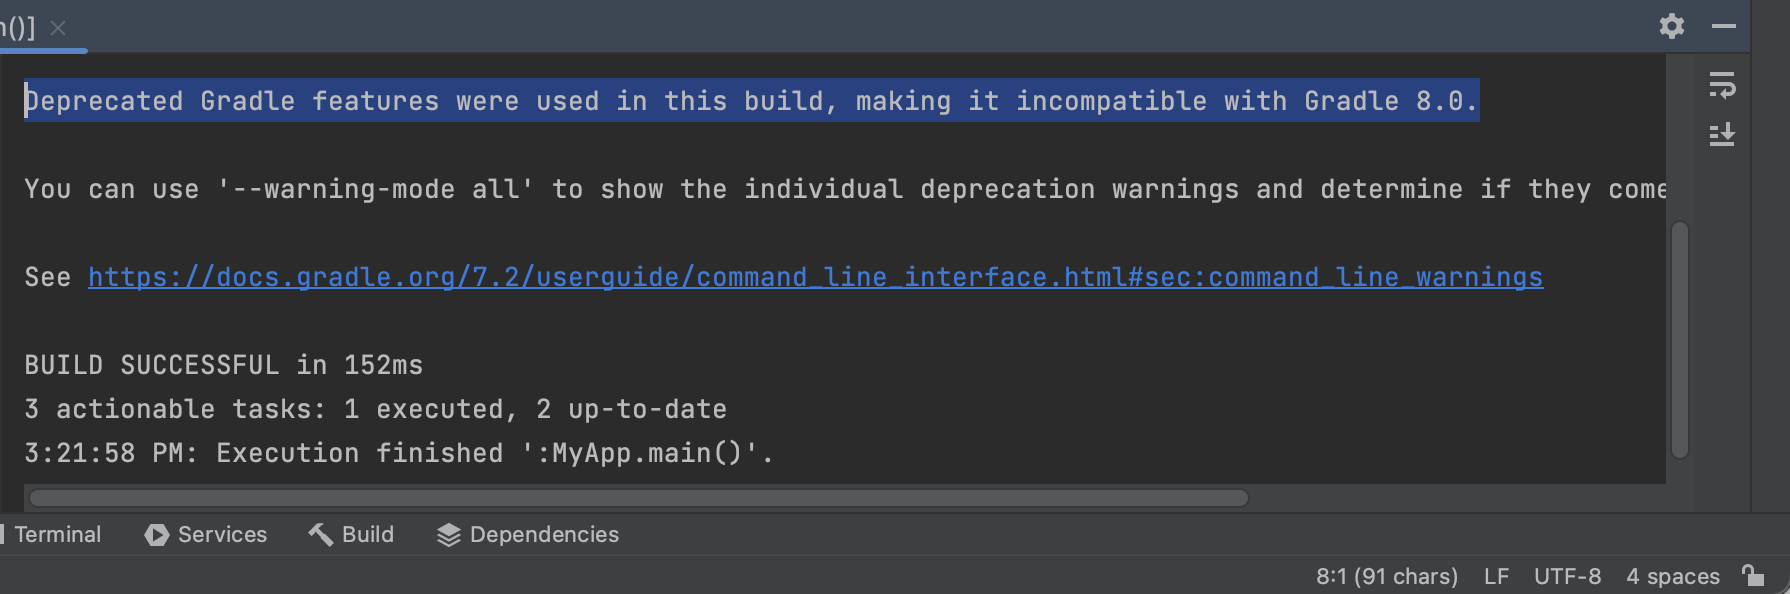 Deprecated Gradle features were used in this build